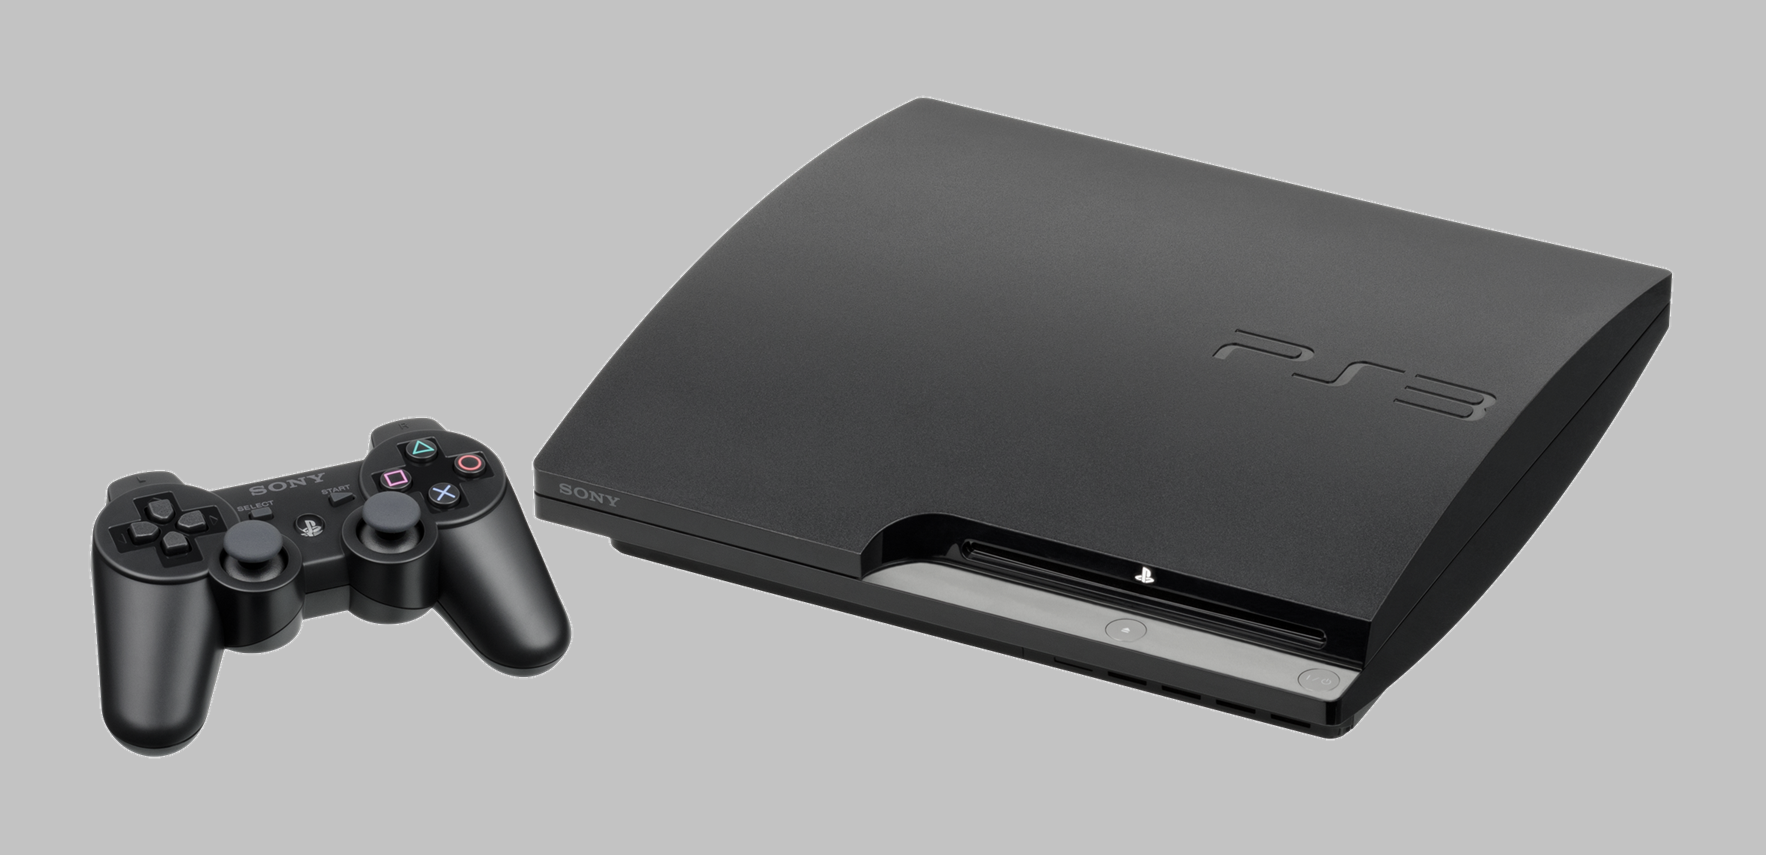 Apparently, The PS3 Is Not As Dead As You Might Think